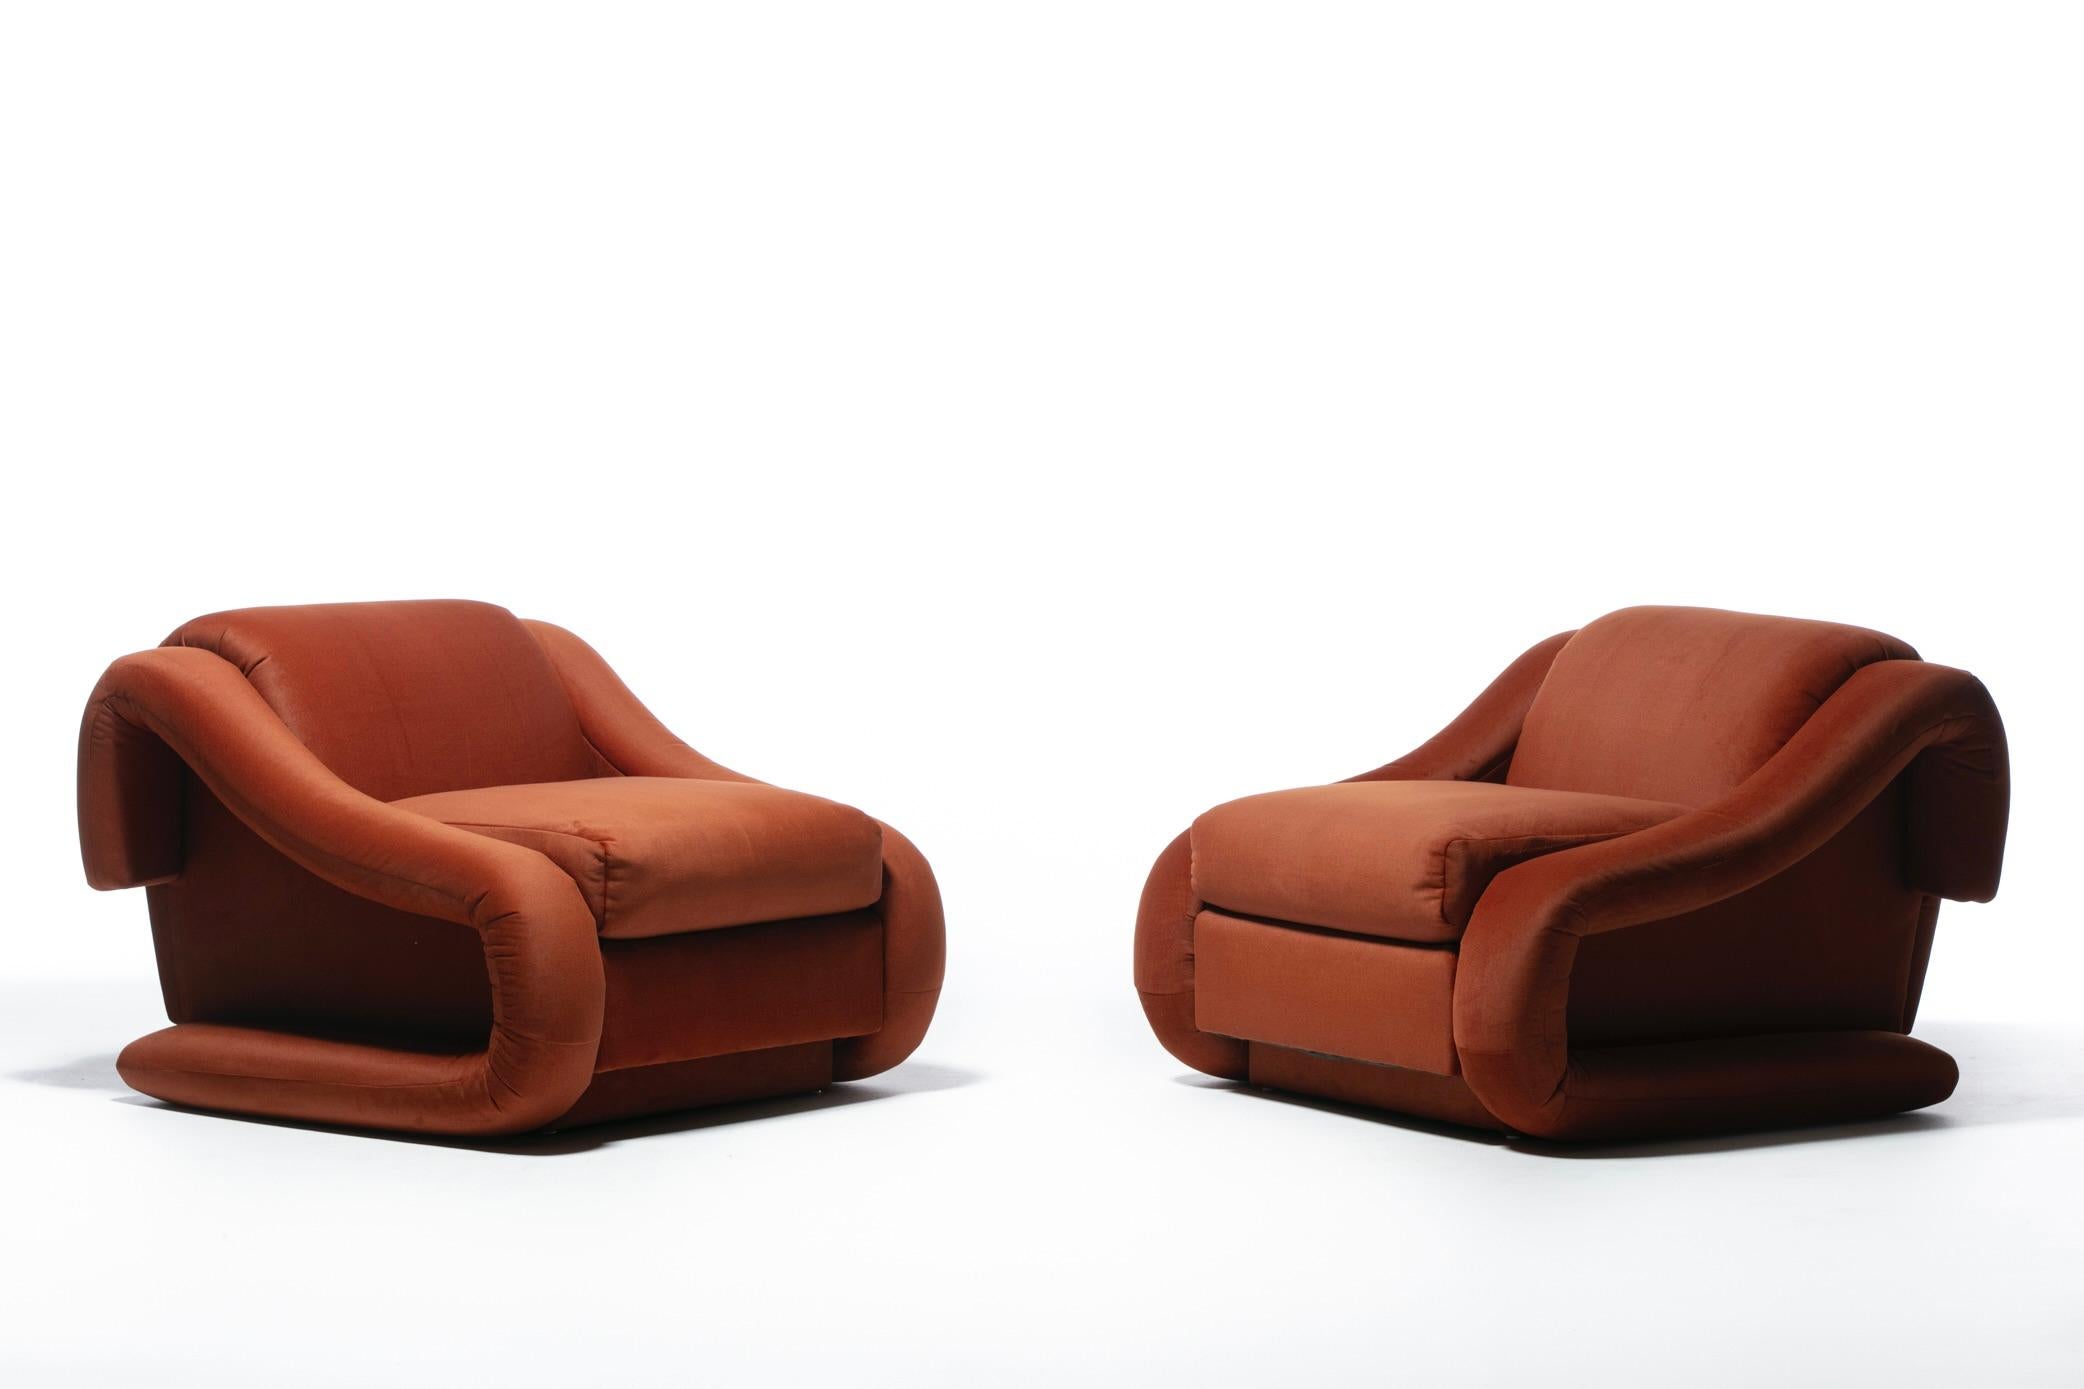 Post-Modern Monumental Post Modern Pair of Weiman Lounge Chairs in Marmalade Orange Fabric For Sale